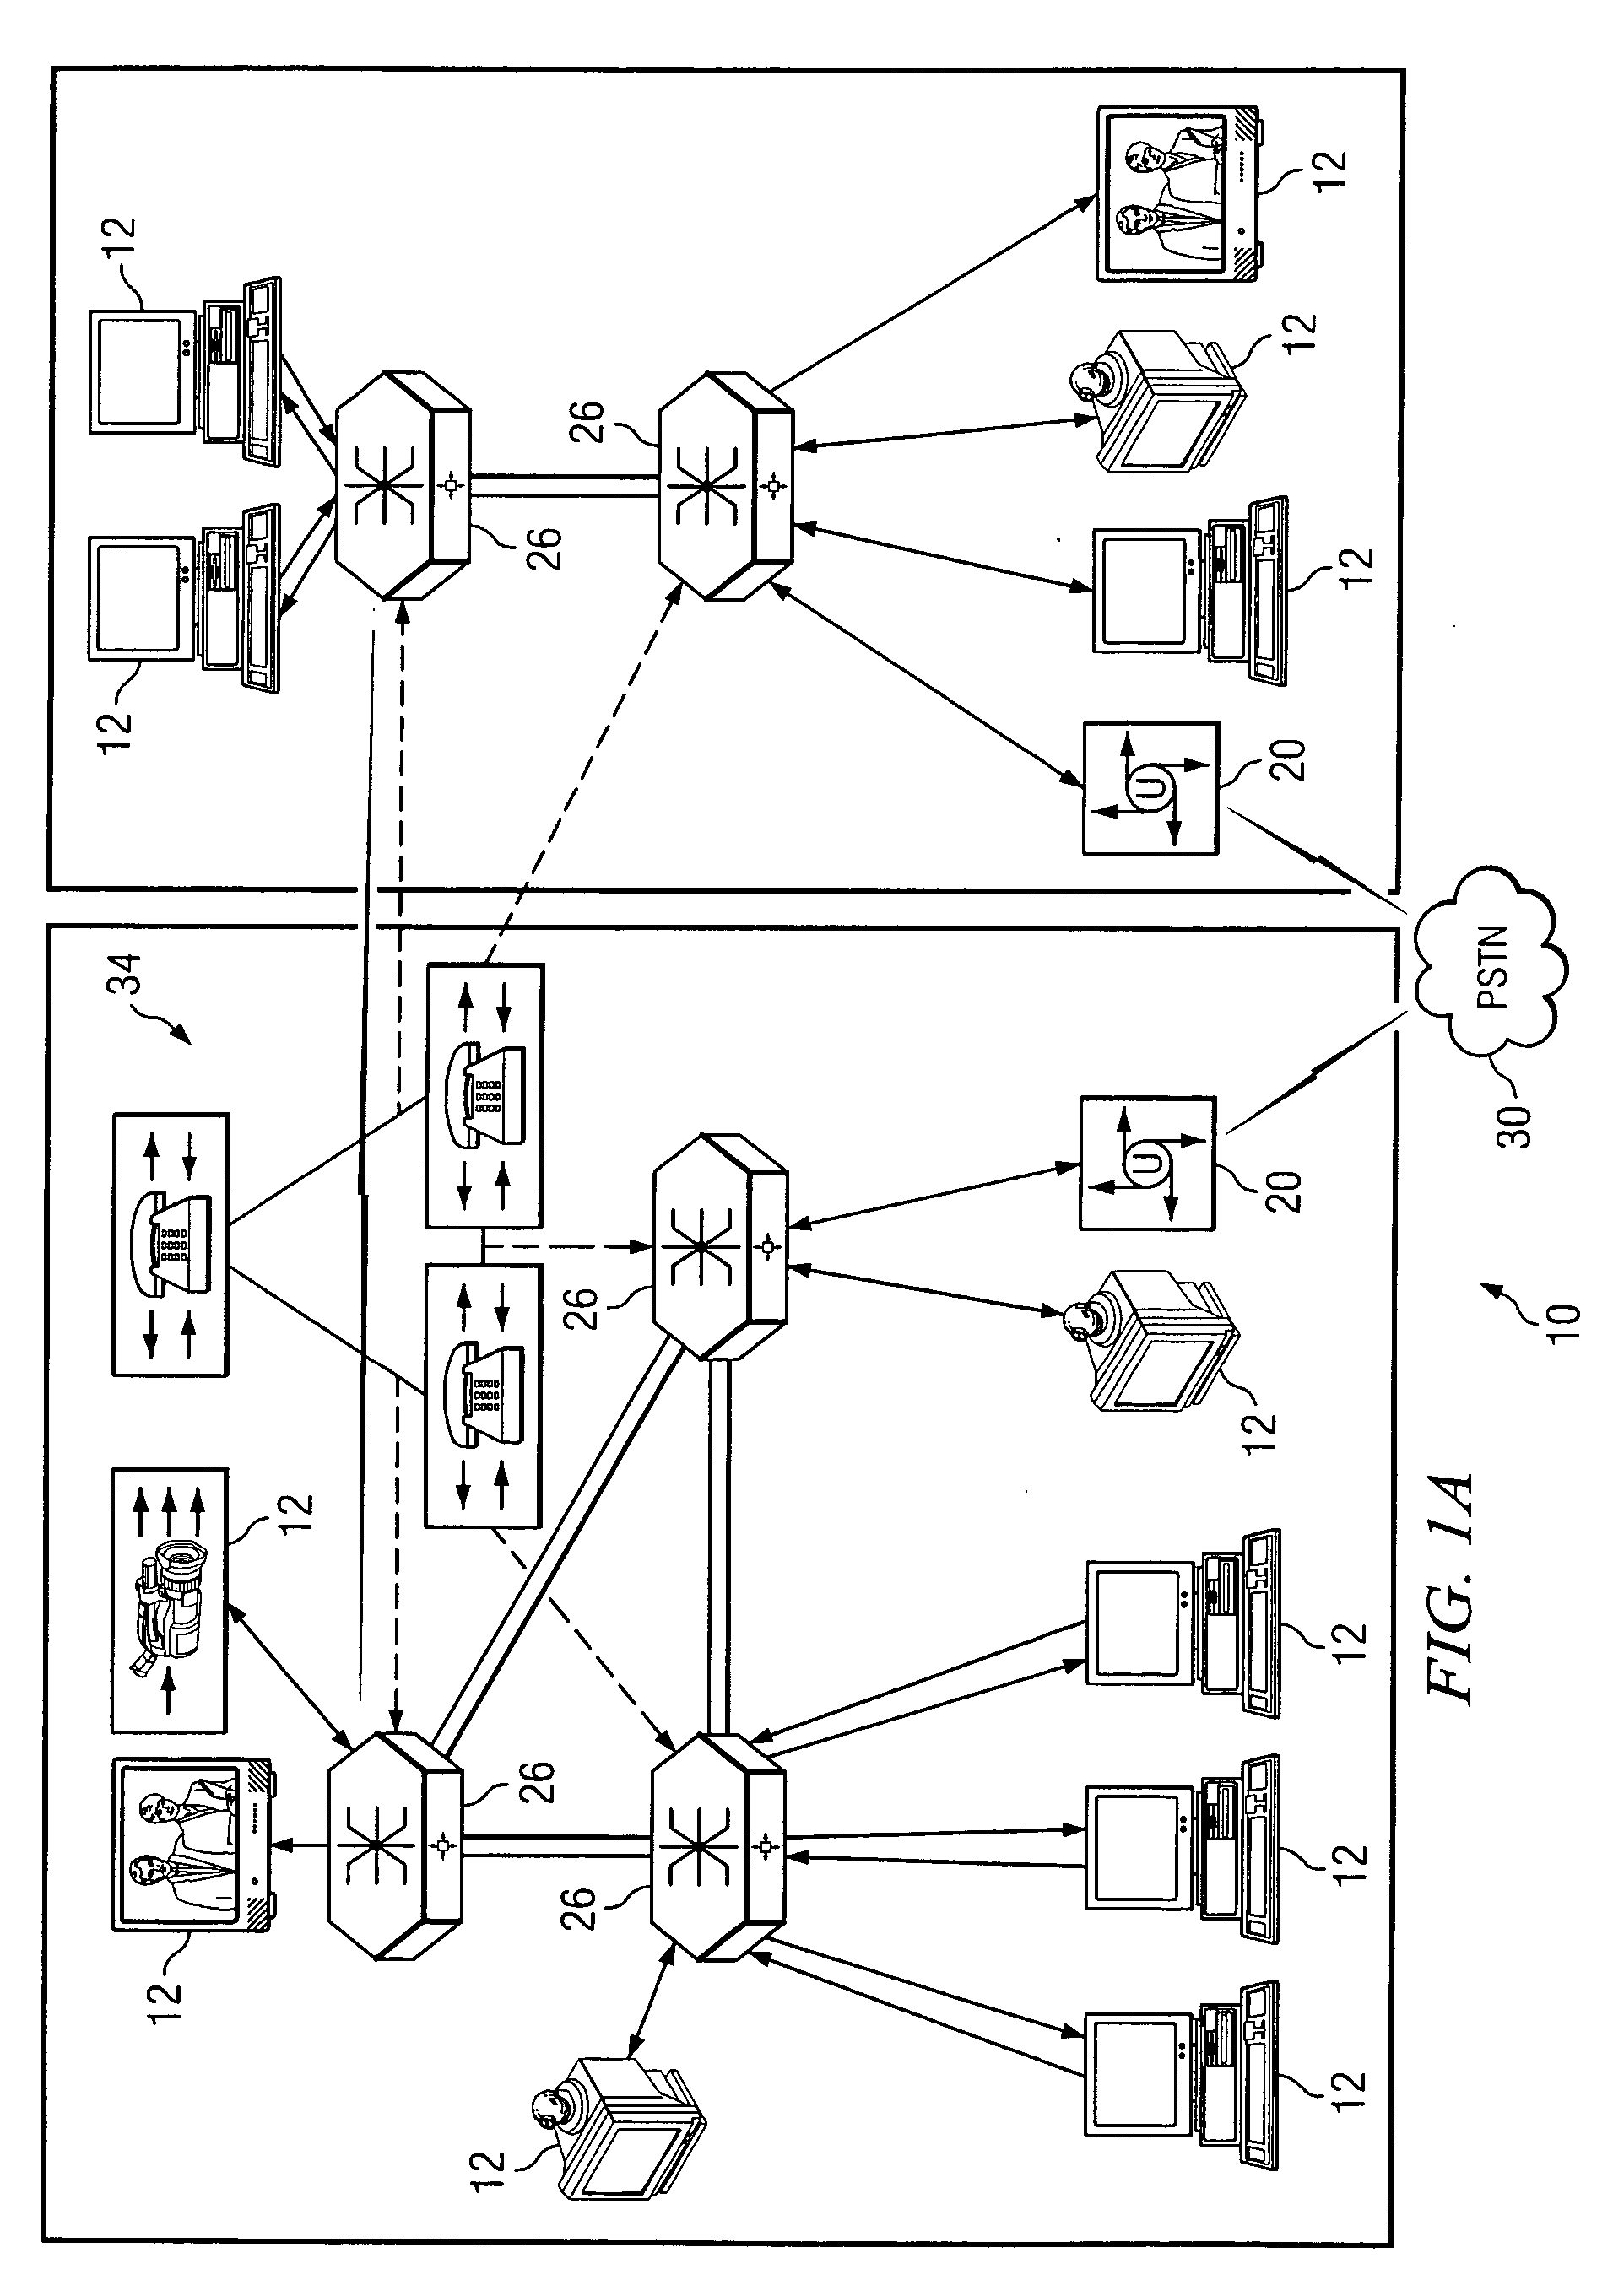 System and method for performing distributed video conferencing